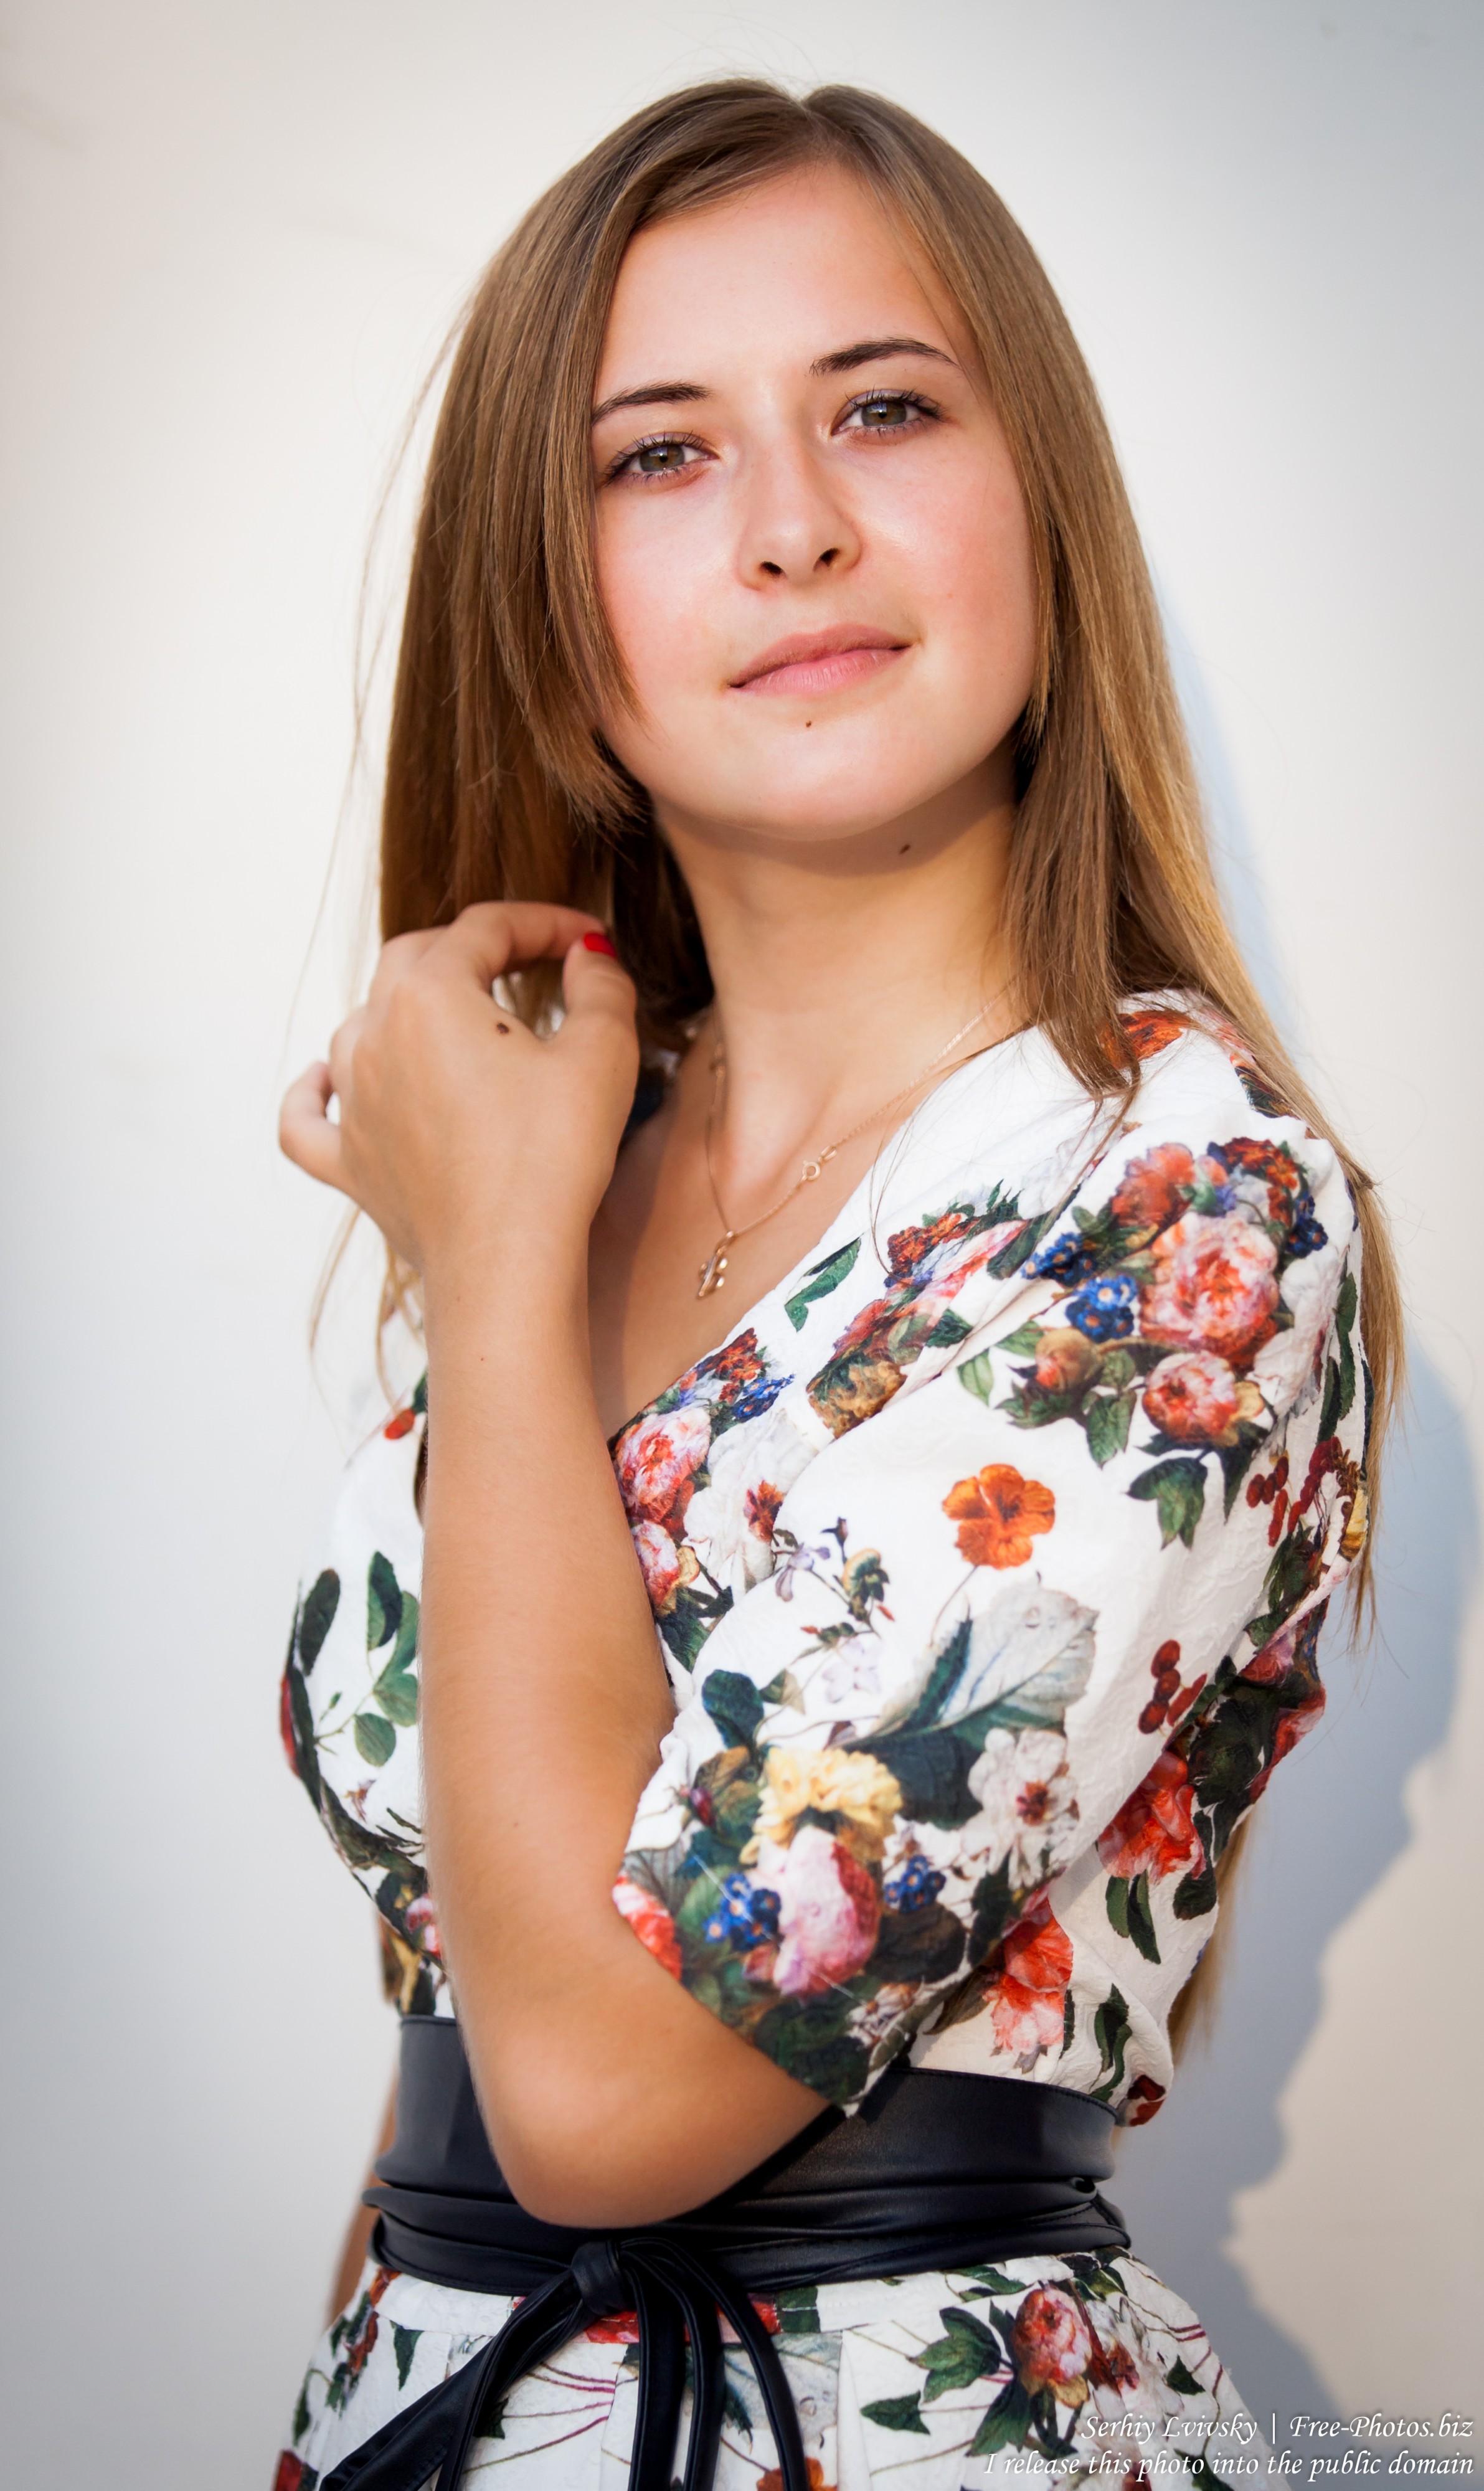 Photo Of An 18 Year Old Girl Photographed By Serhiy Lvivsky In August